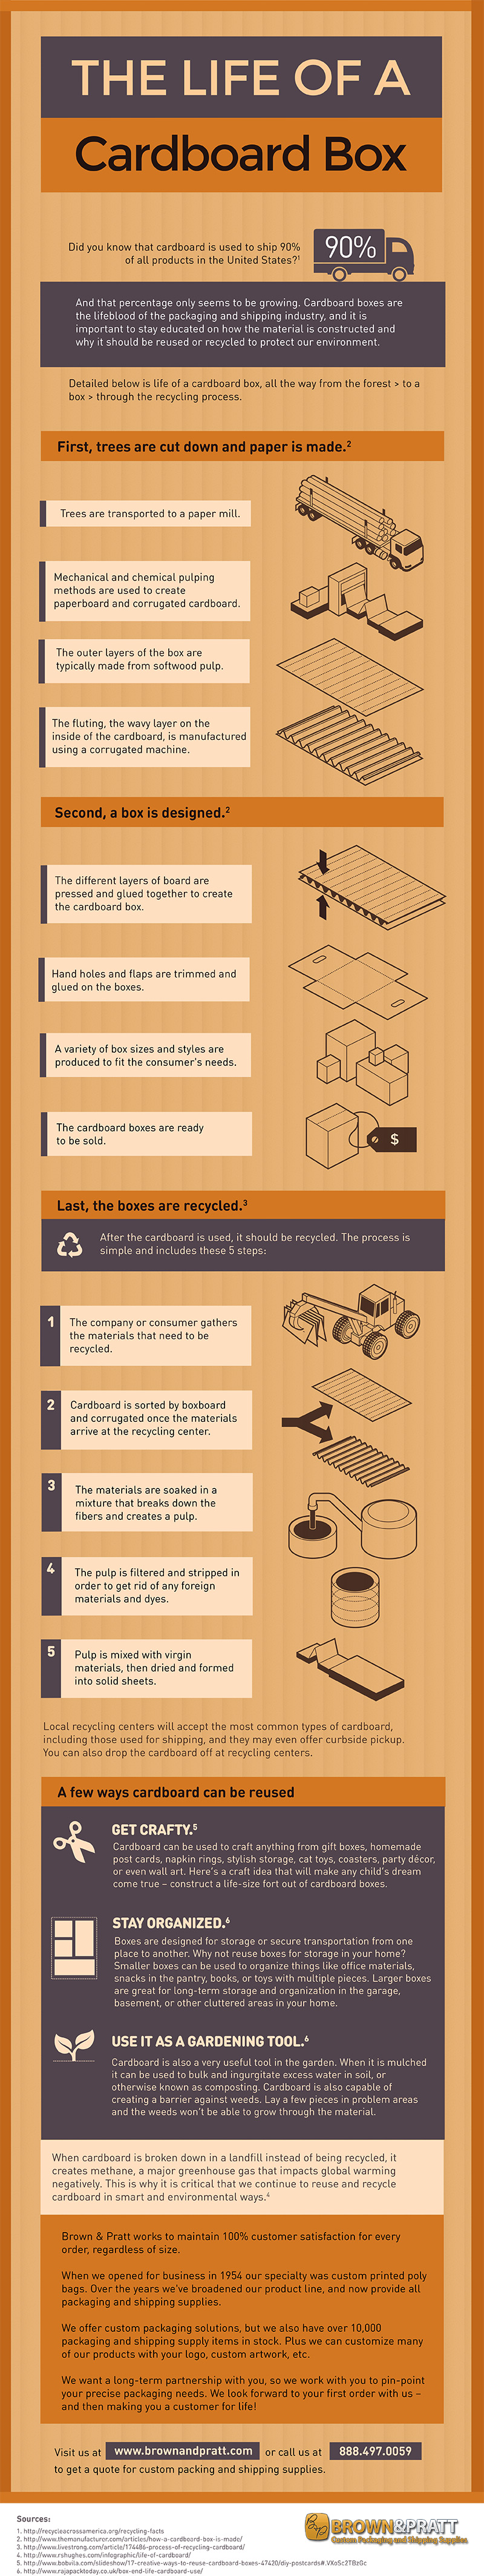 Life-Of-A-Cardboard-Box-Infographic